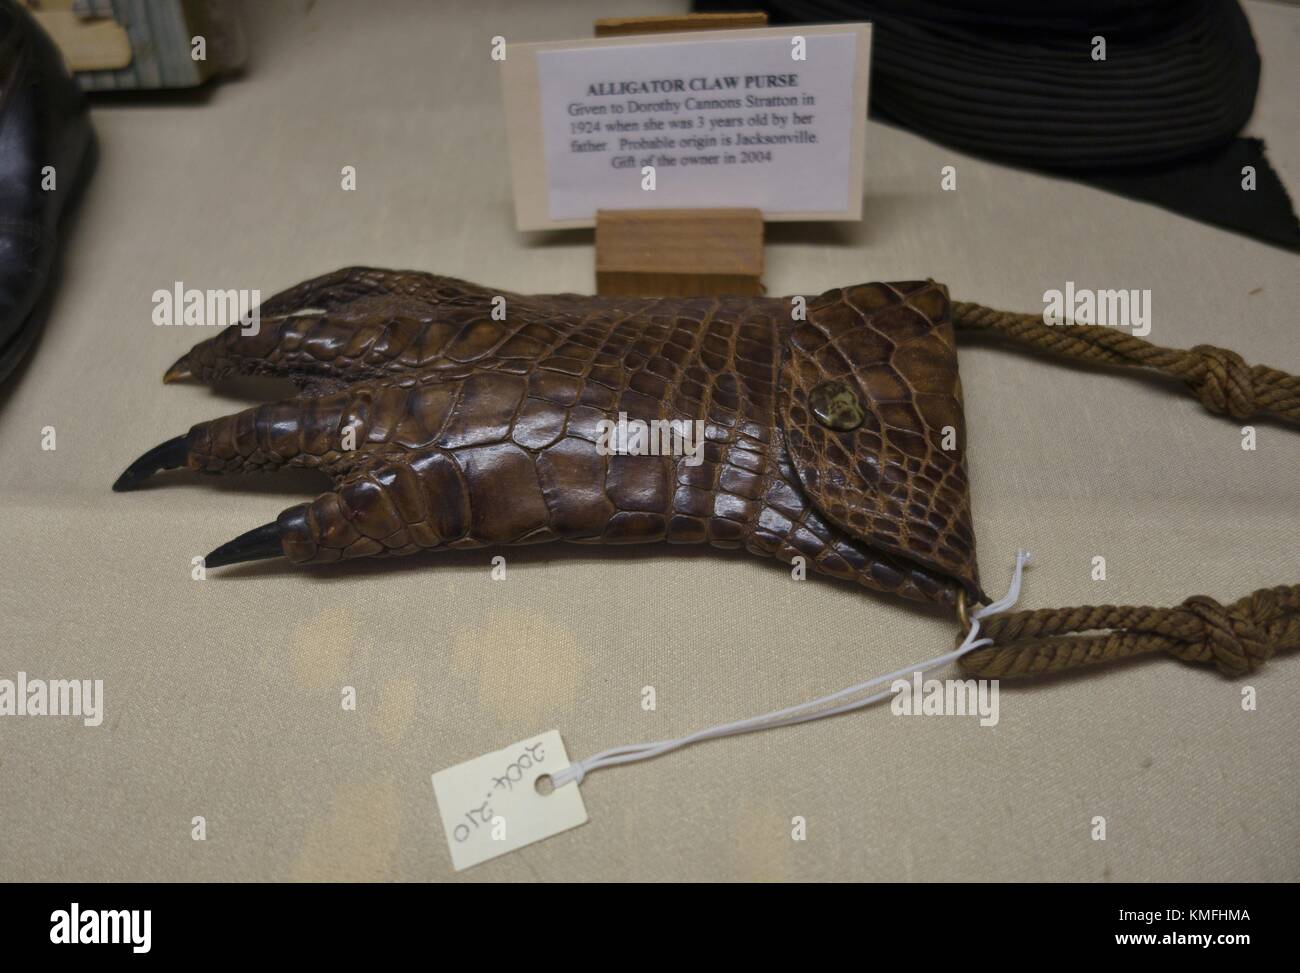 An alligator claw purse, on display at the Halifax Historical Museum in Daytona Beach, Florida, USA. Stock Photo